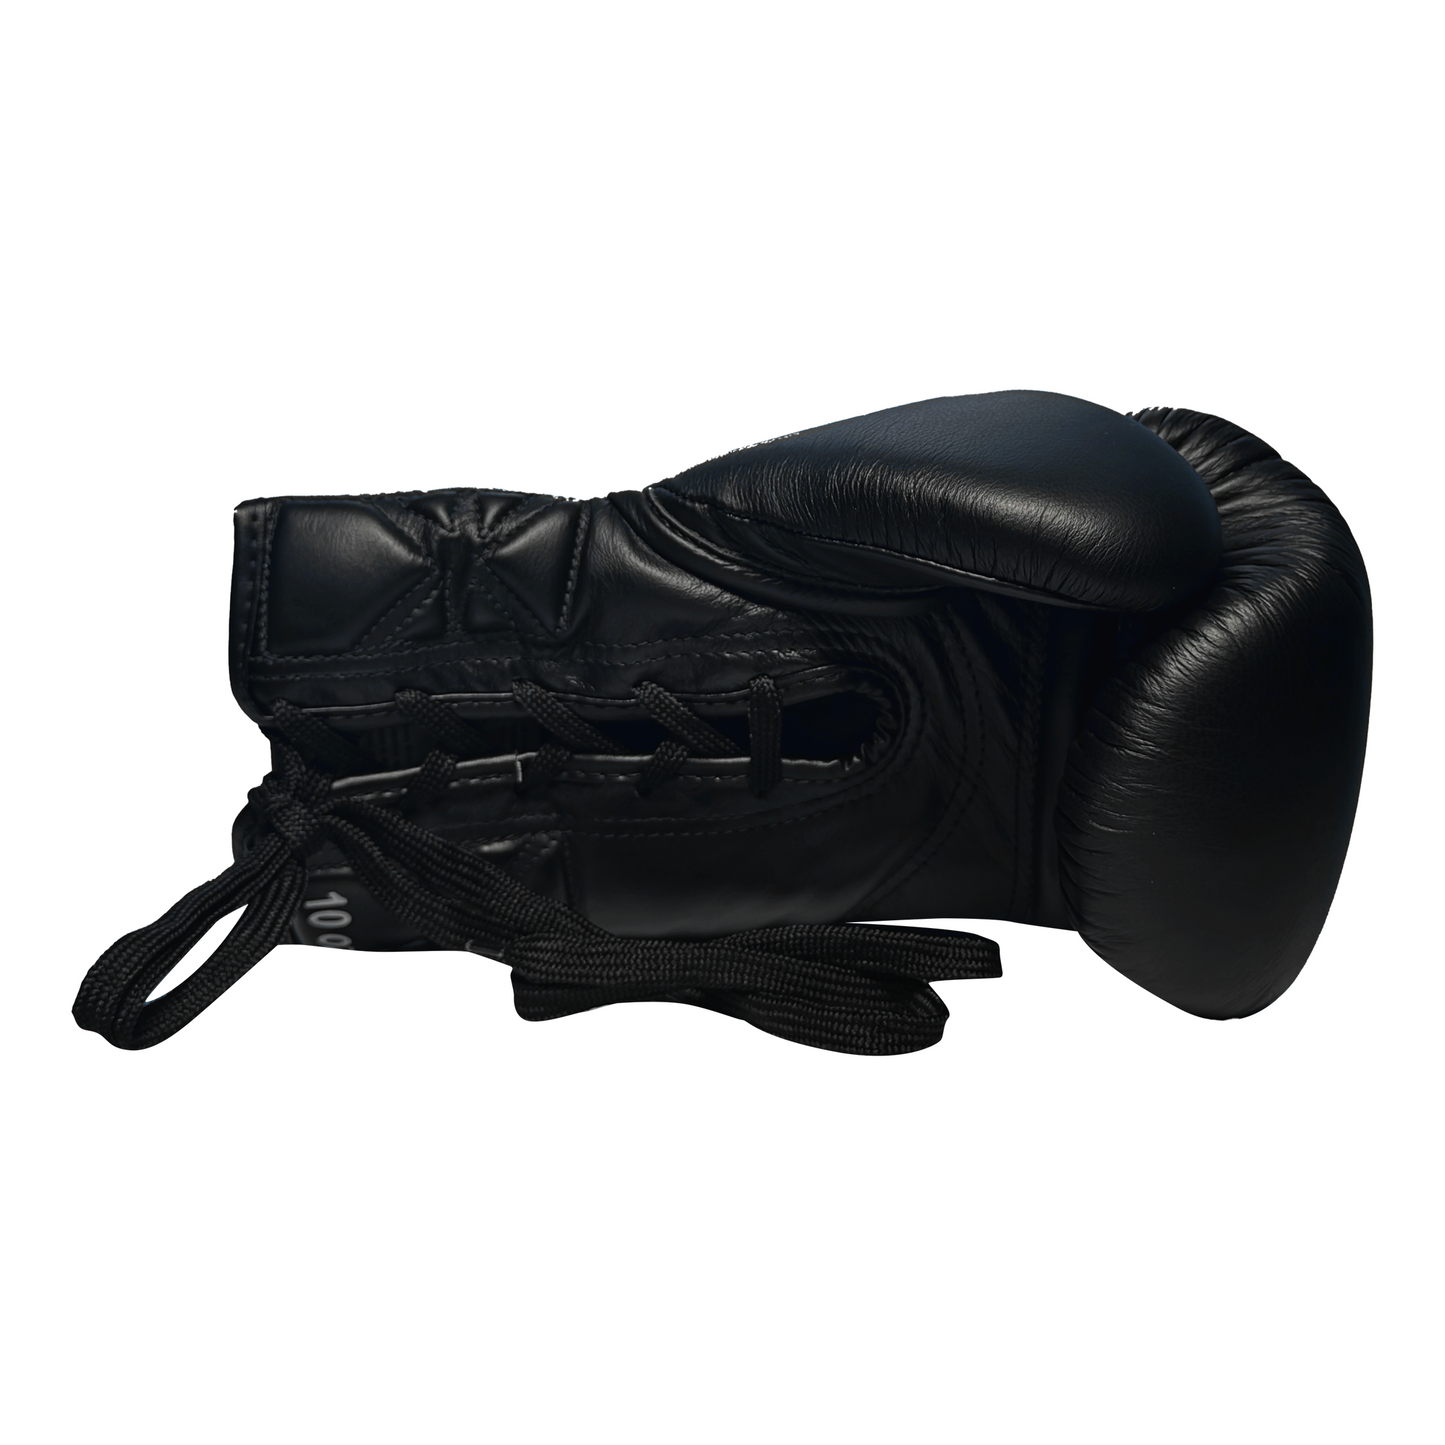 Top King Boxhandschuhe "Super Competition" Black